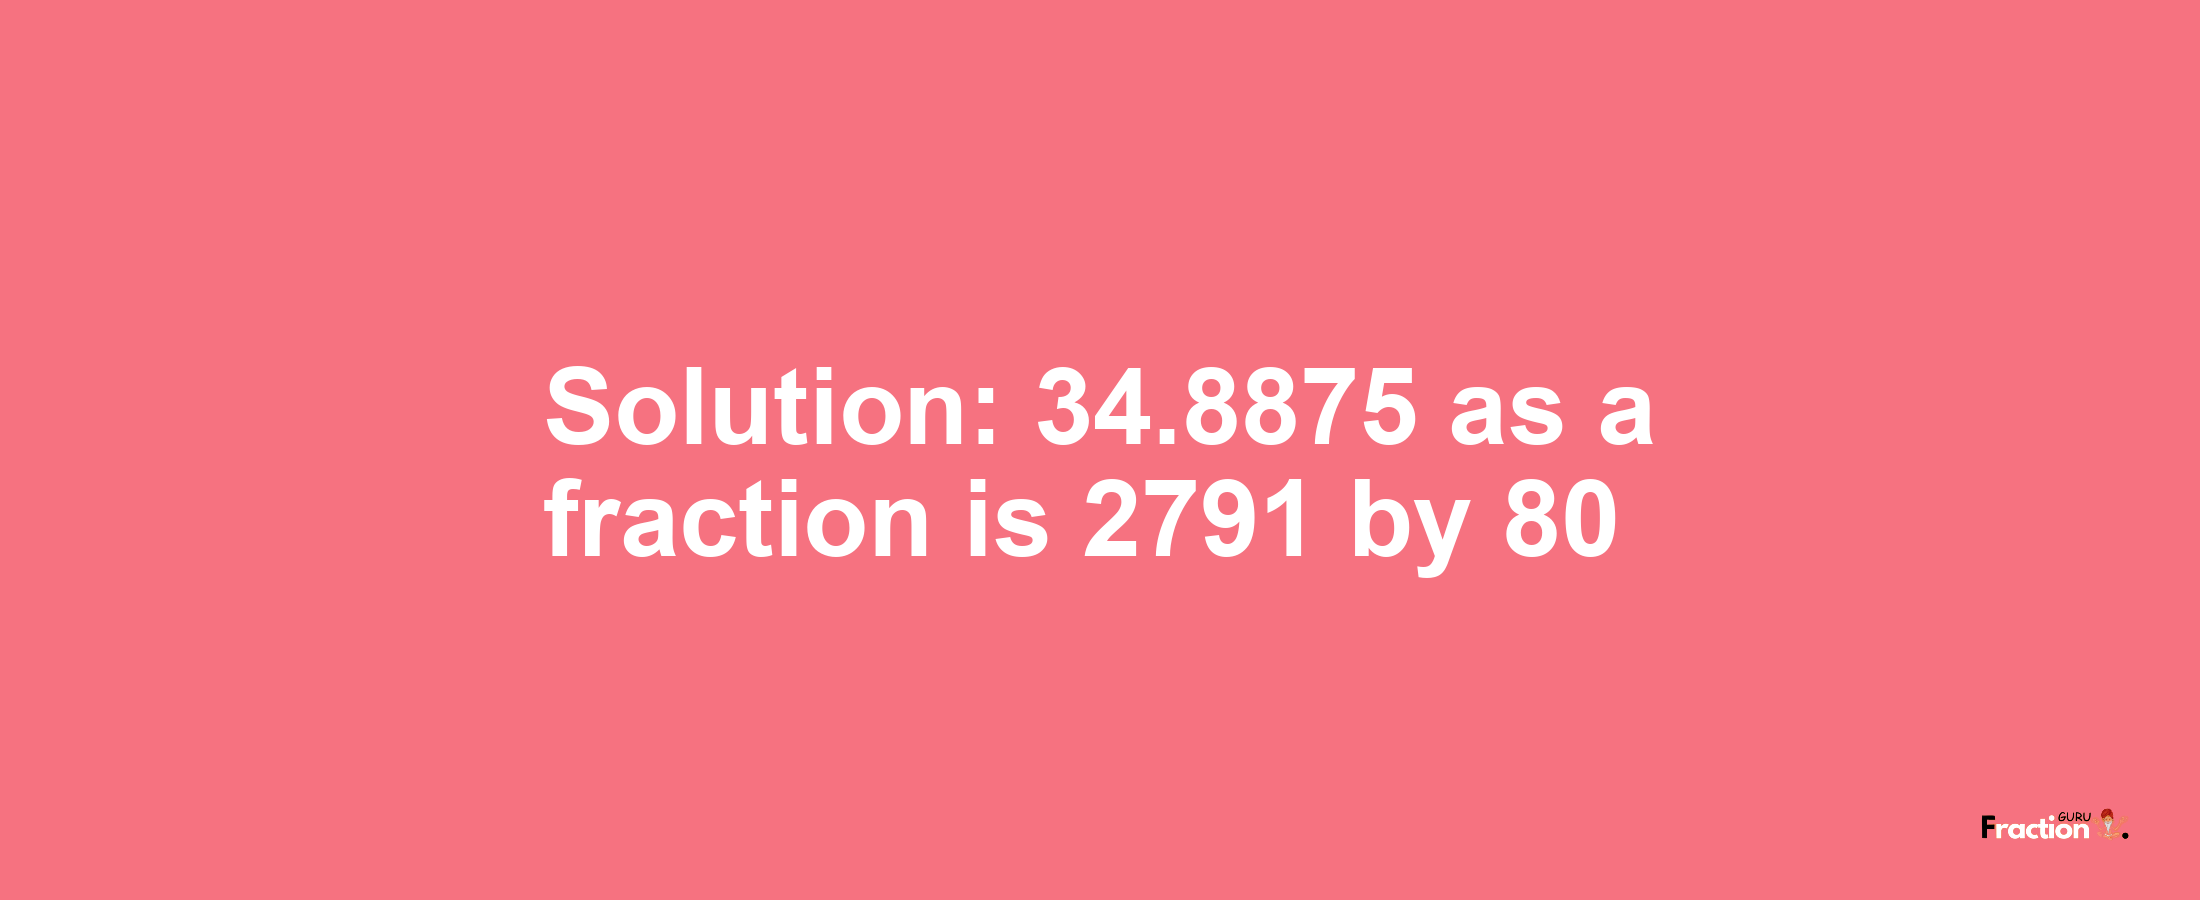 Solution:34.8875 as a fraction is 2791/80